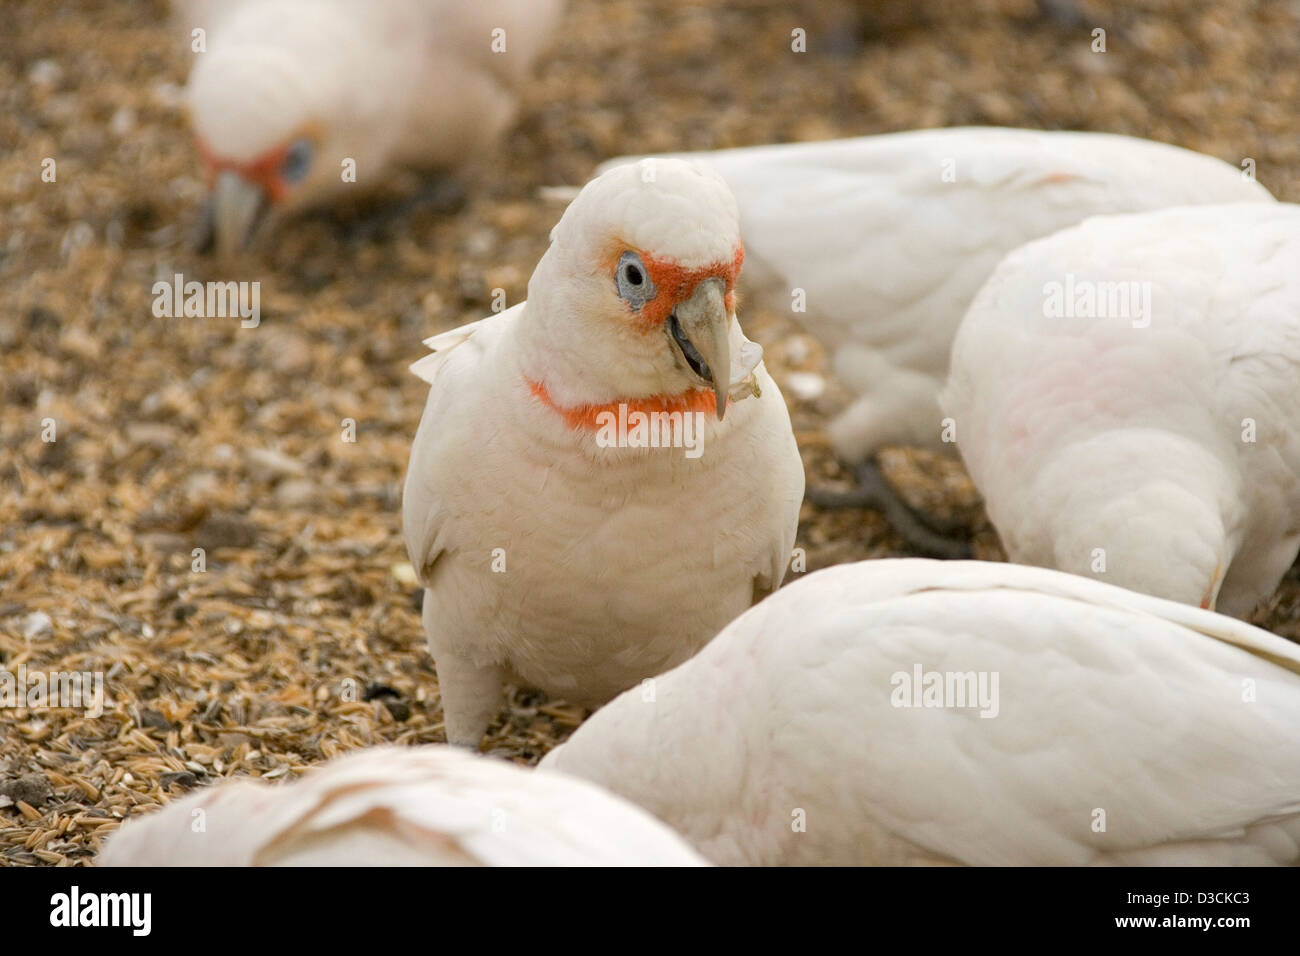 Flock of long billed corellas - Australian parrots - in the wild, feeding on the ground on grain spilled from a storage silo Stock Photo